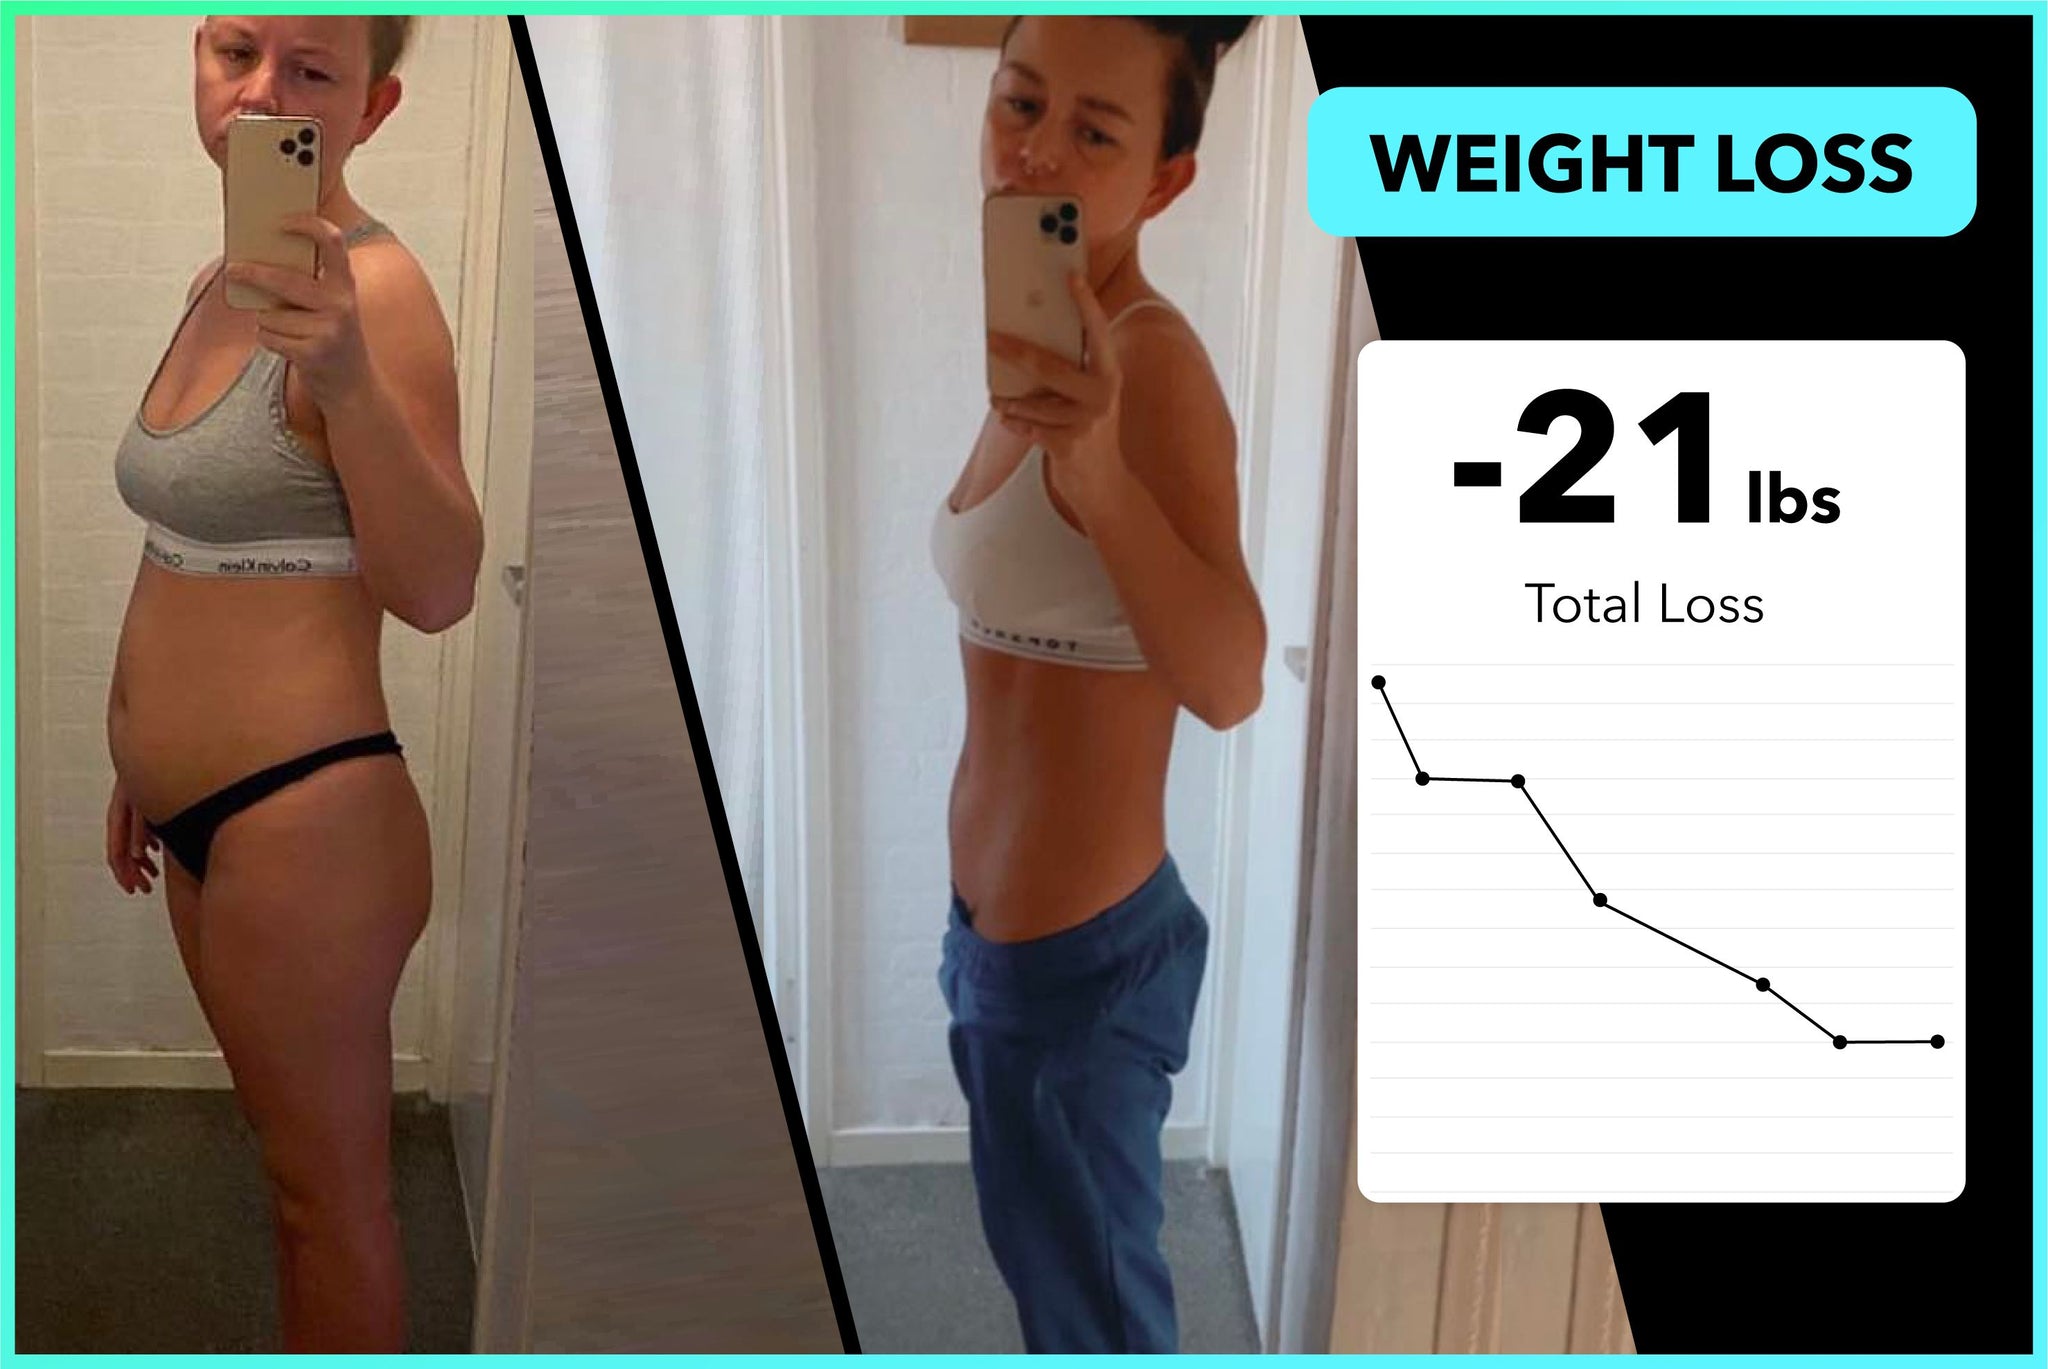 Sian lost 21lbs with Team RH